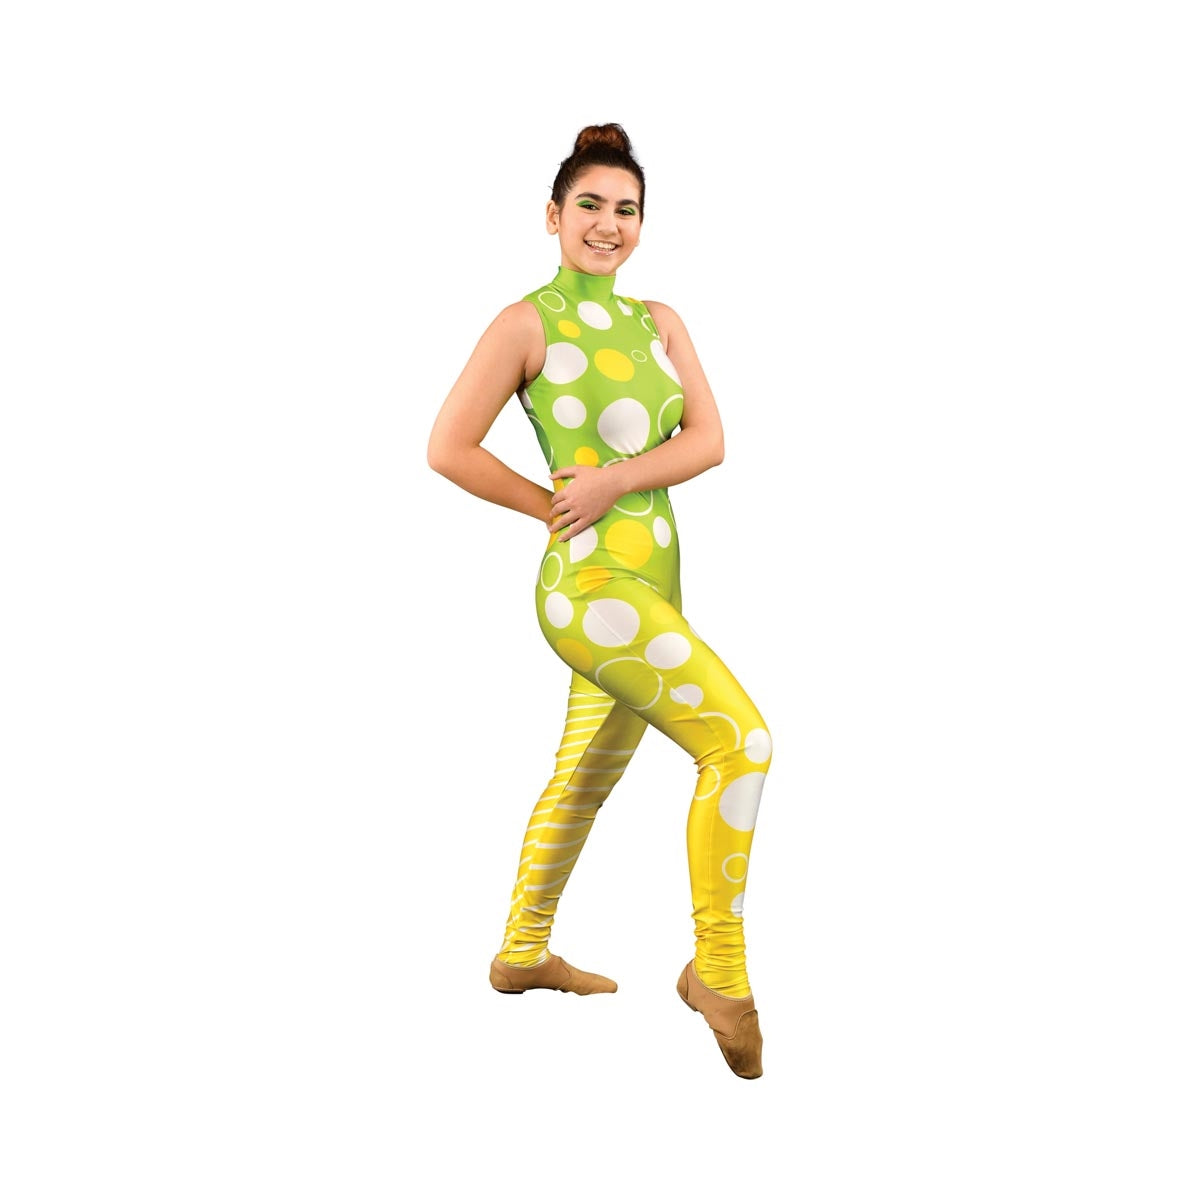 Bright green and yellow color guard costume